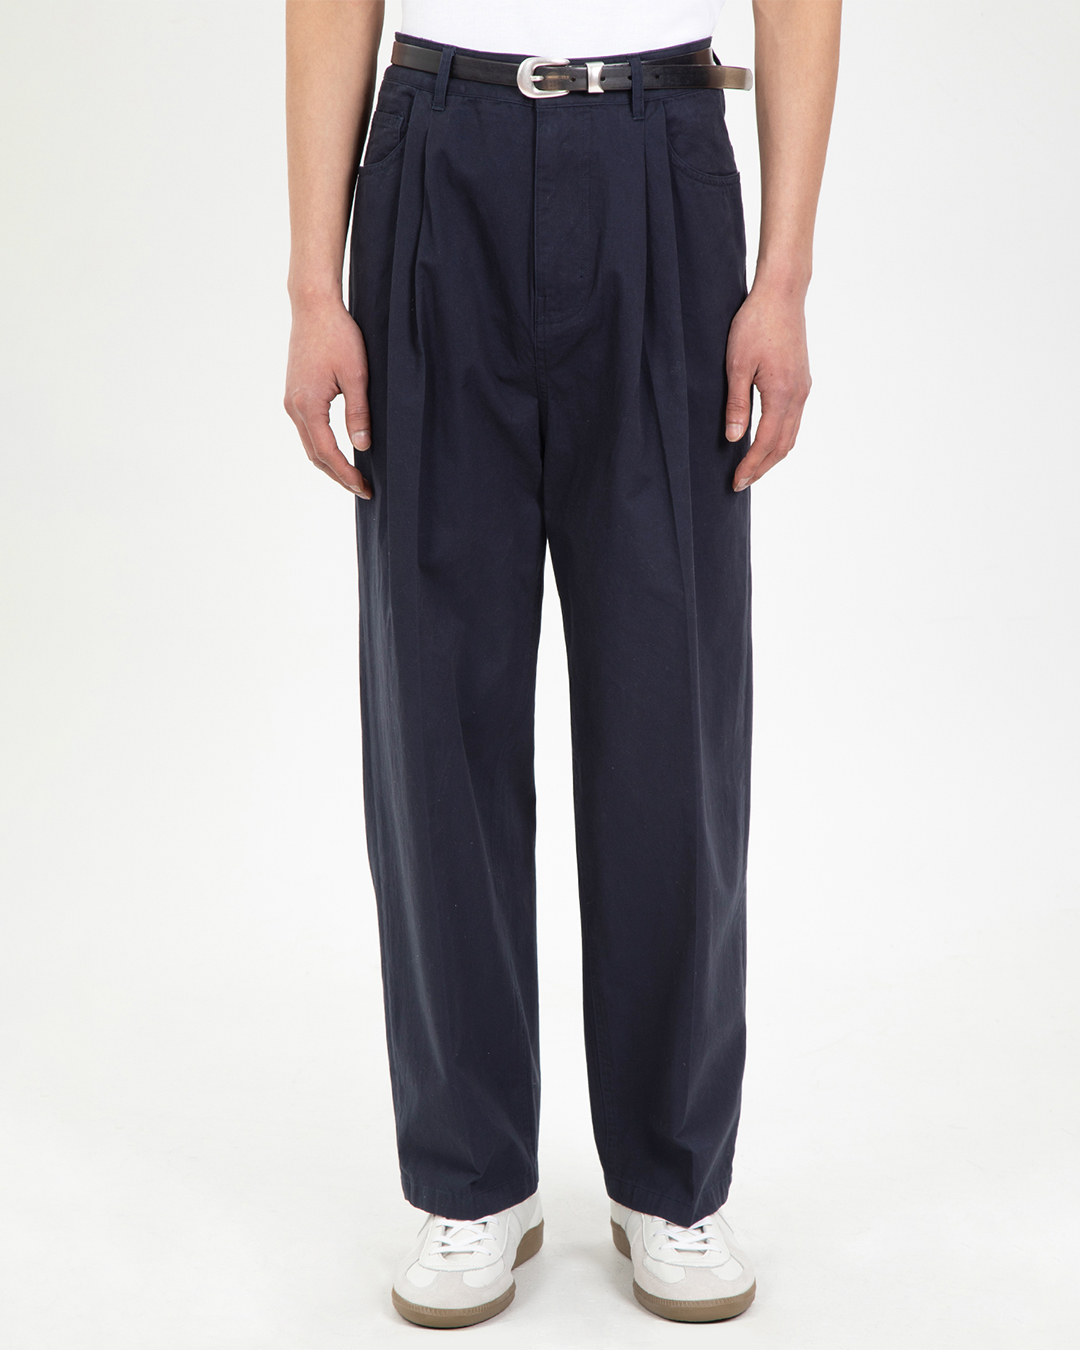 TWO TUCK WIDE PANTS (NAVY)